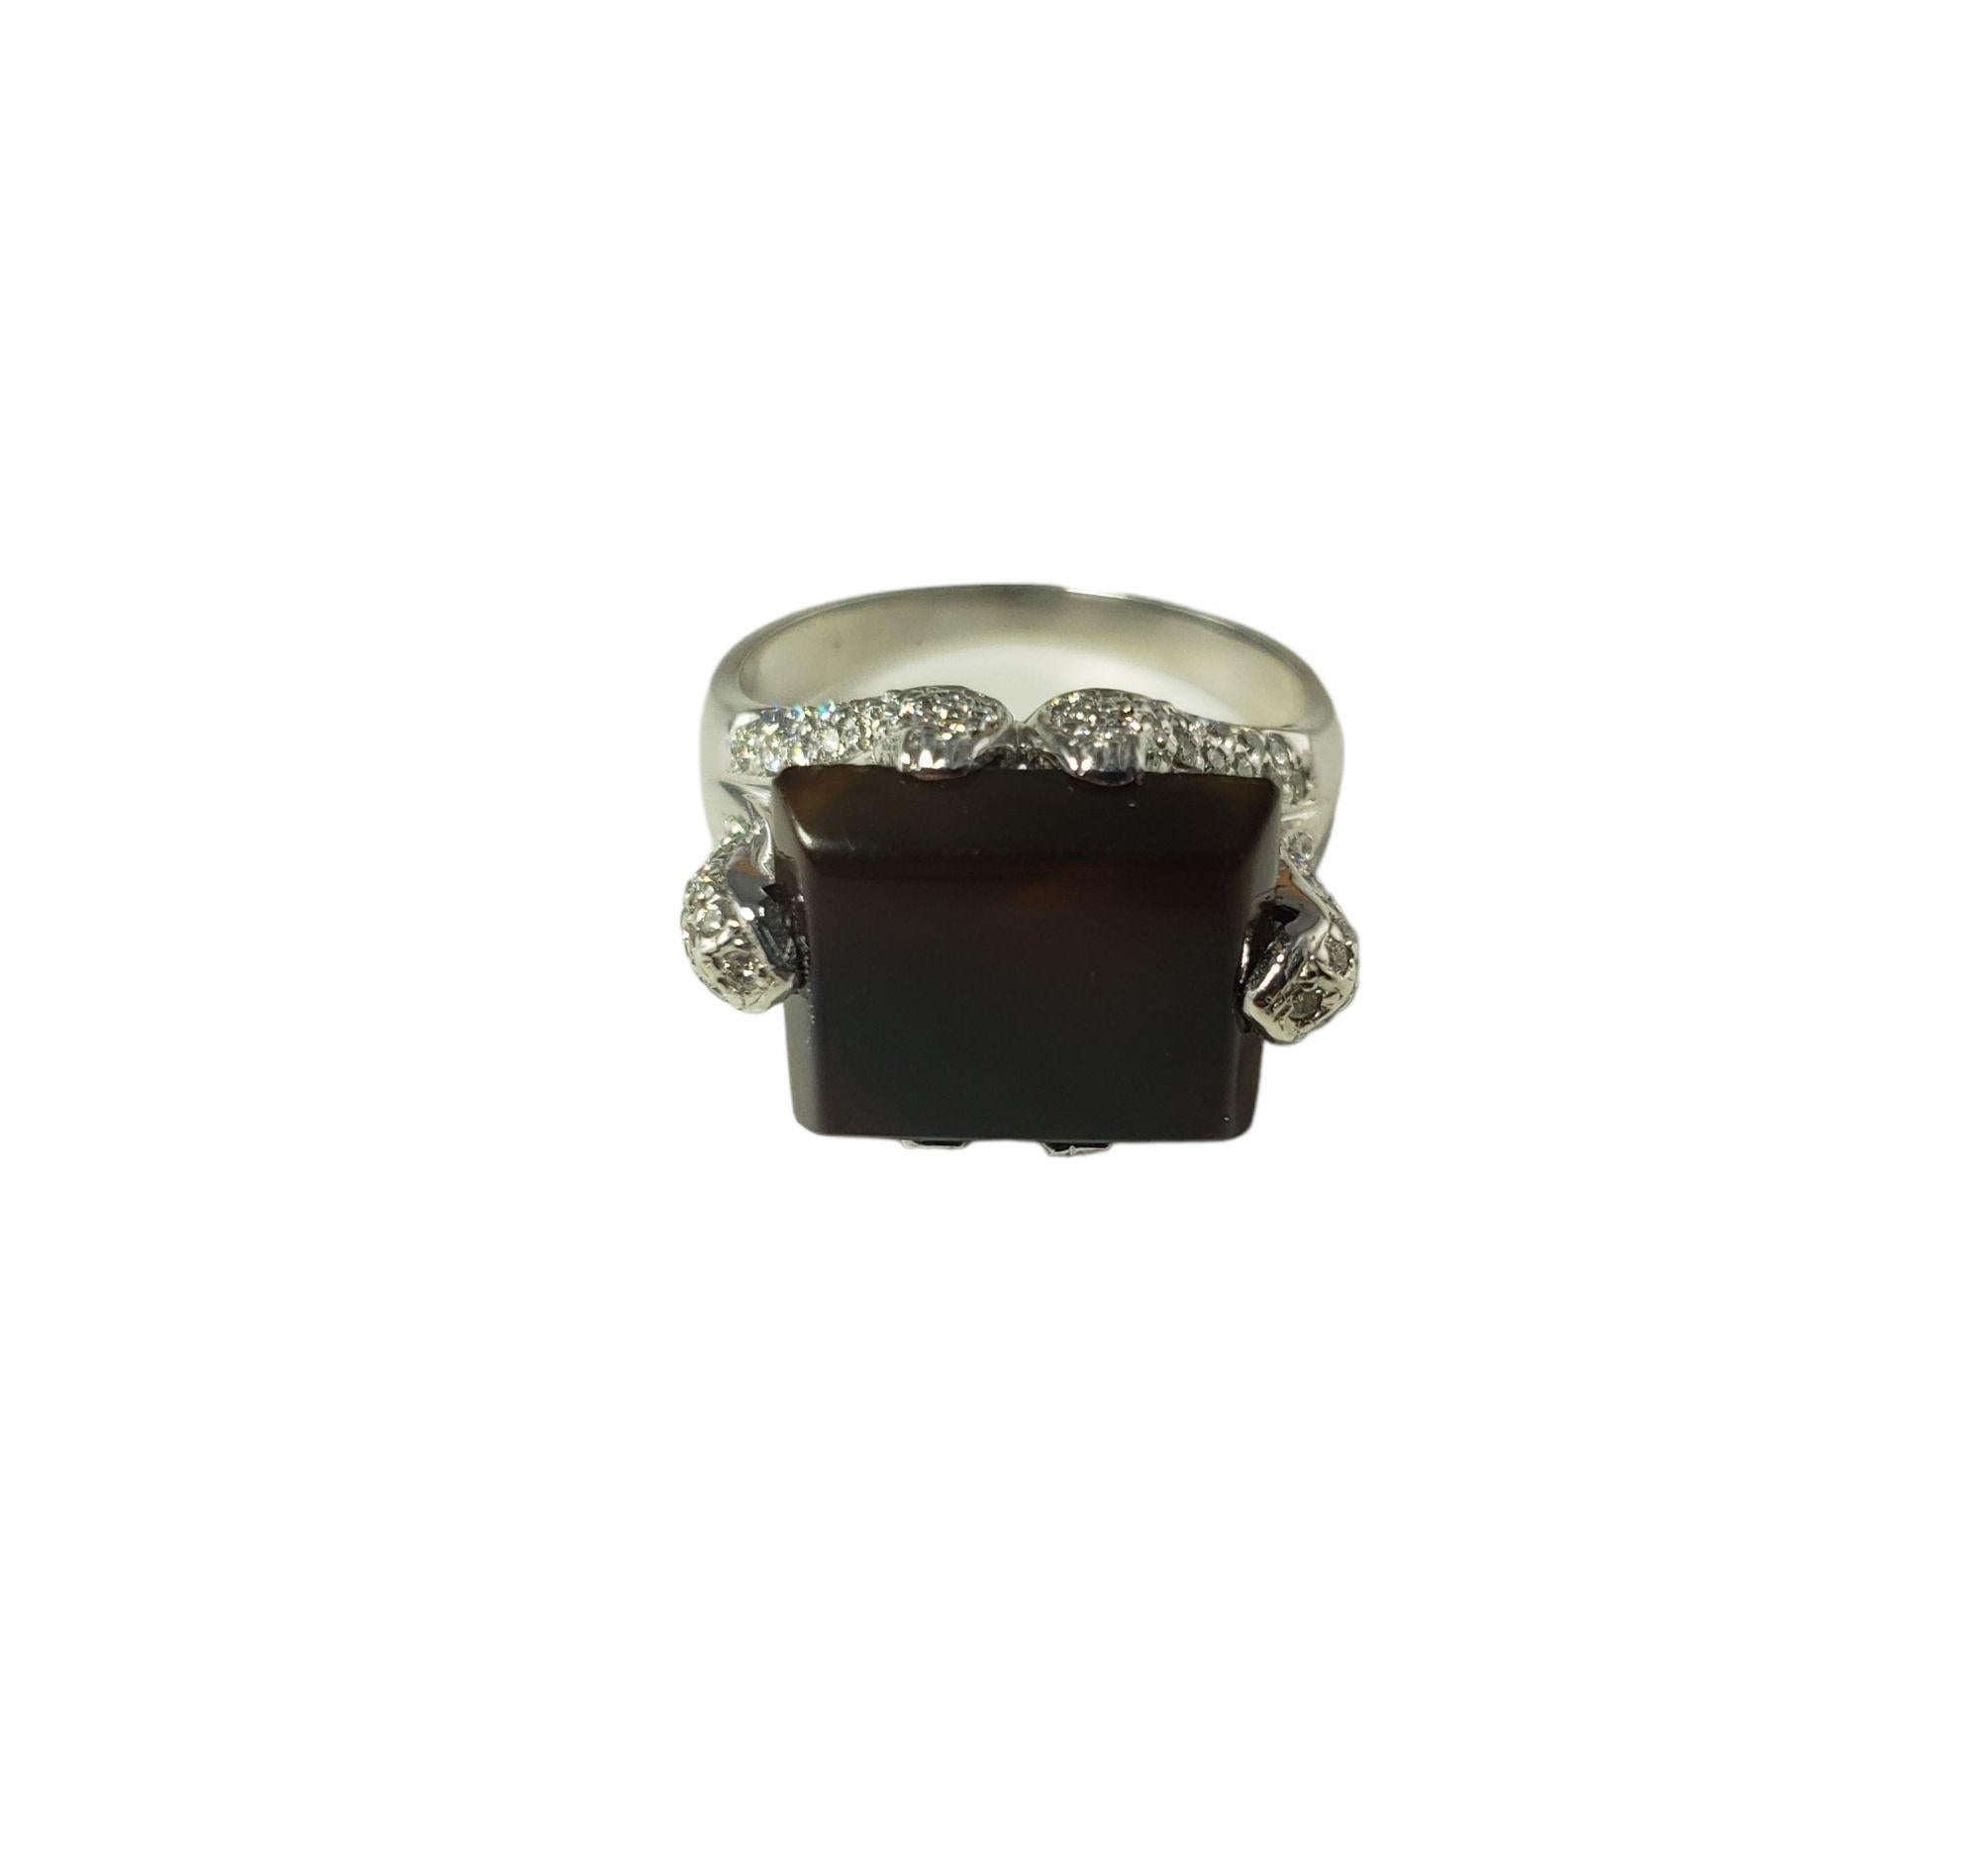 This elegant ring features one tablet cut sard chalcedony stone (14 mm x 11 mm) and 105 round brilliant cut diamonds set in beautifully detailed 14K white gold.  Shank:  2.3 mm.  Width:  14 mm.

Chalcedony weight:  4.20 ct.

Total diamond weight: 